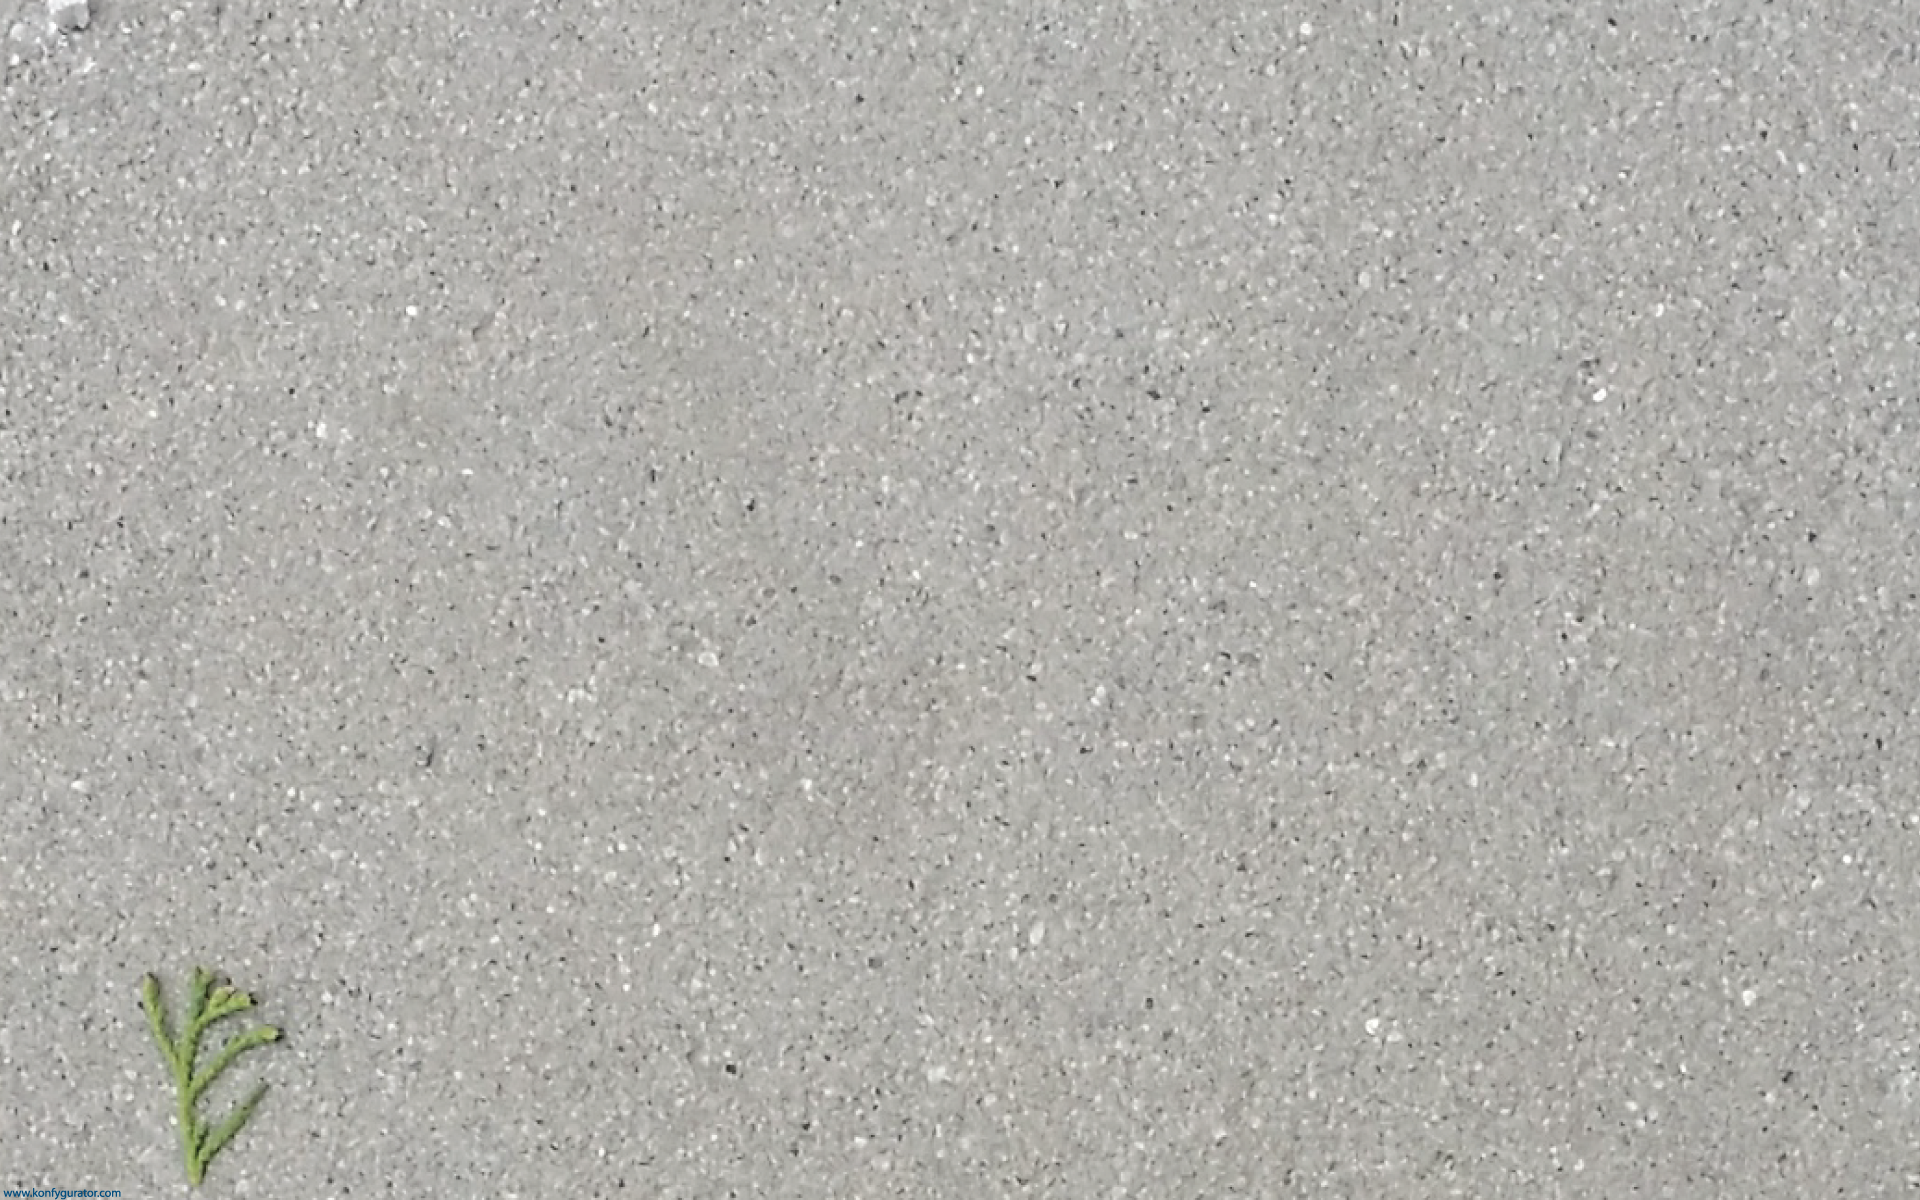 HD Wallpapers - Textures -light, gray, concrete